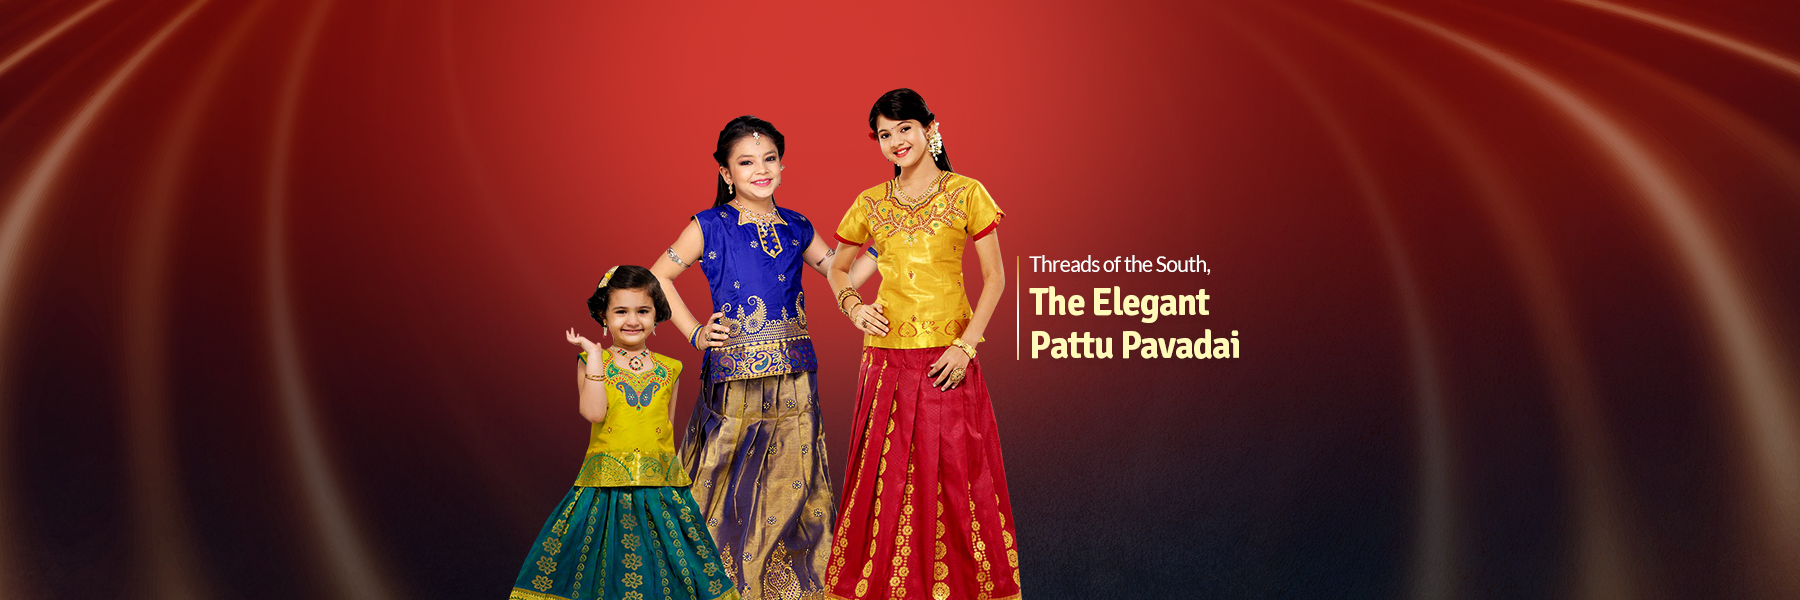 Threads of the South, the Elegant Pattu Pavadai FromIndia.com